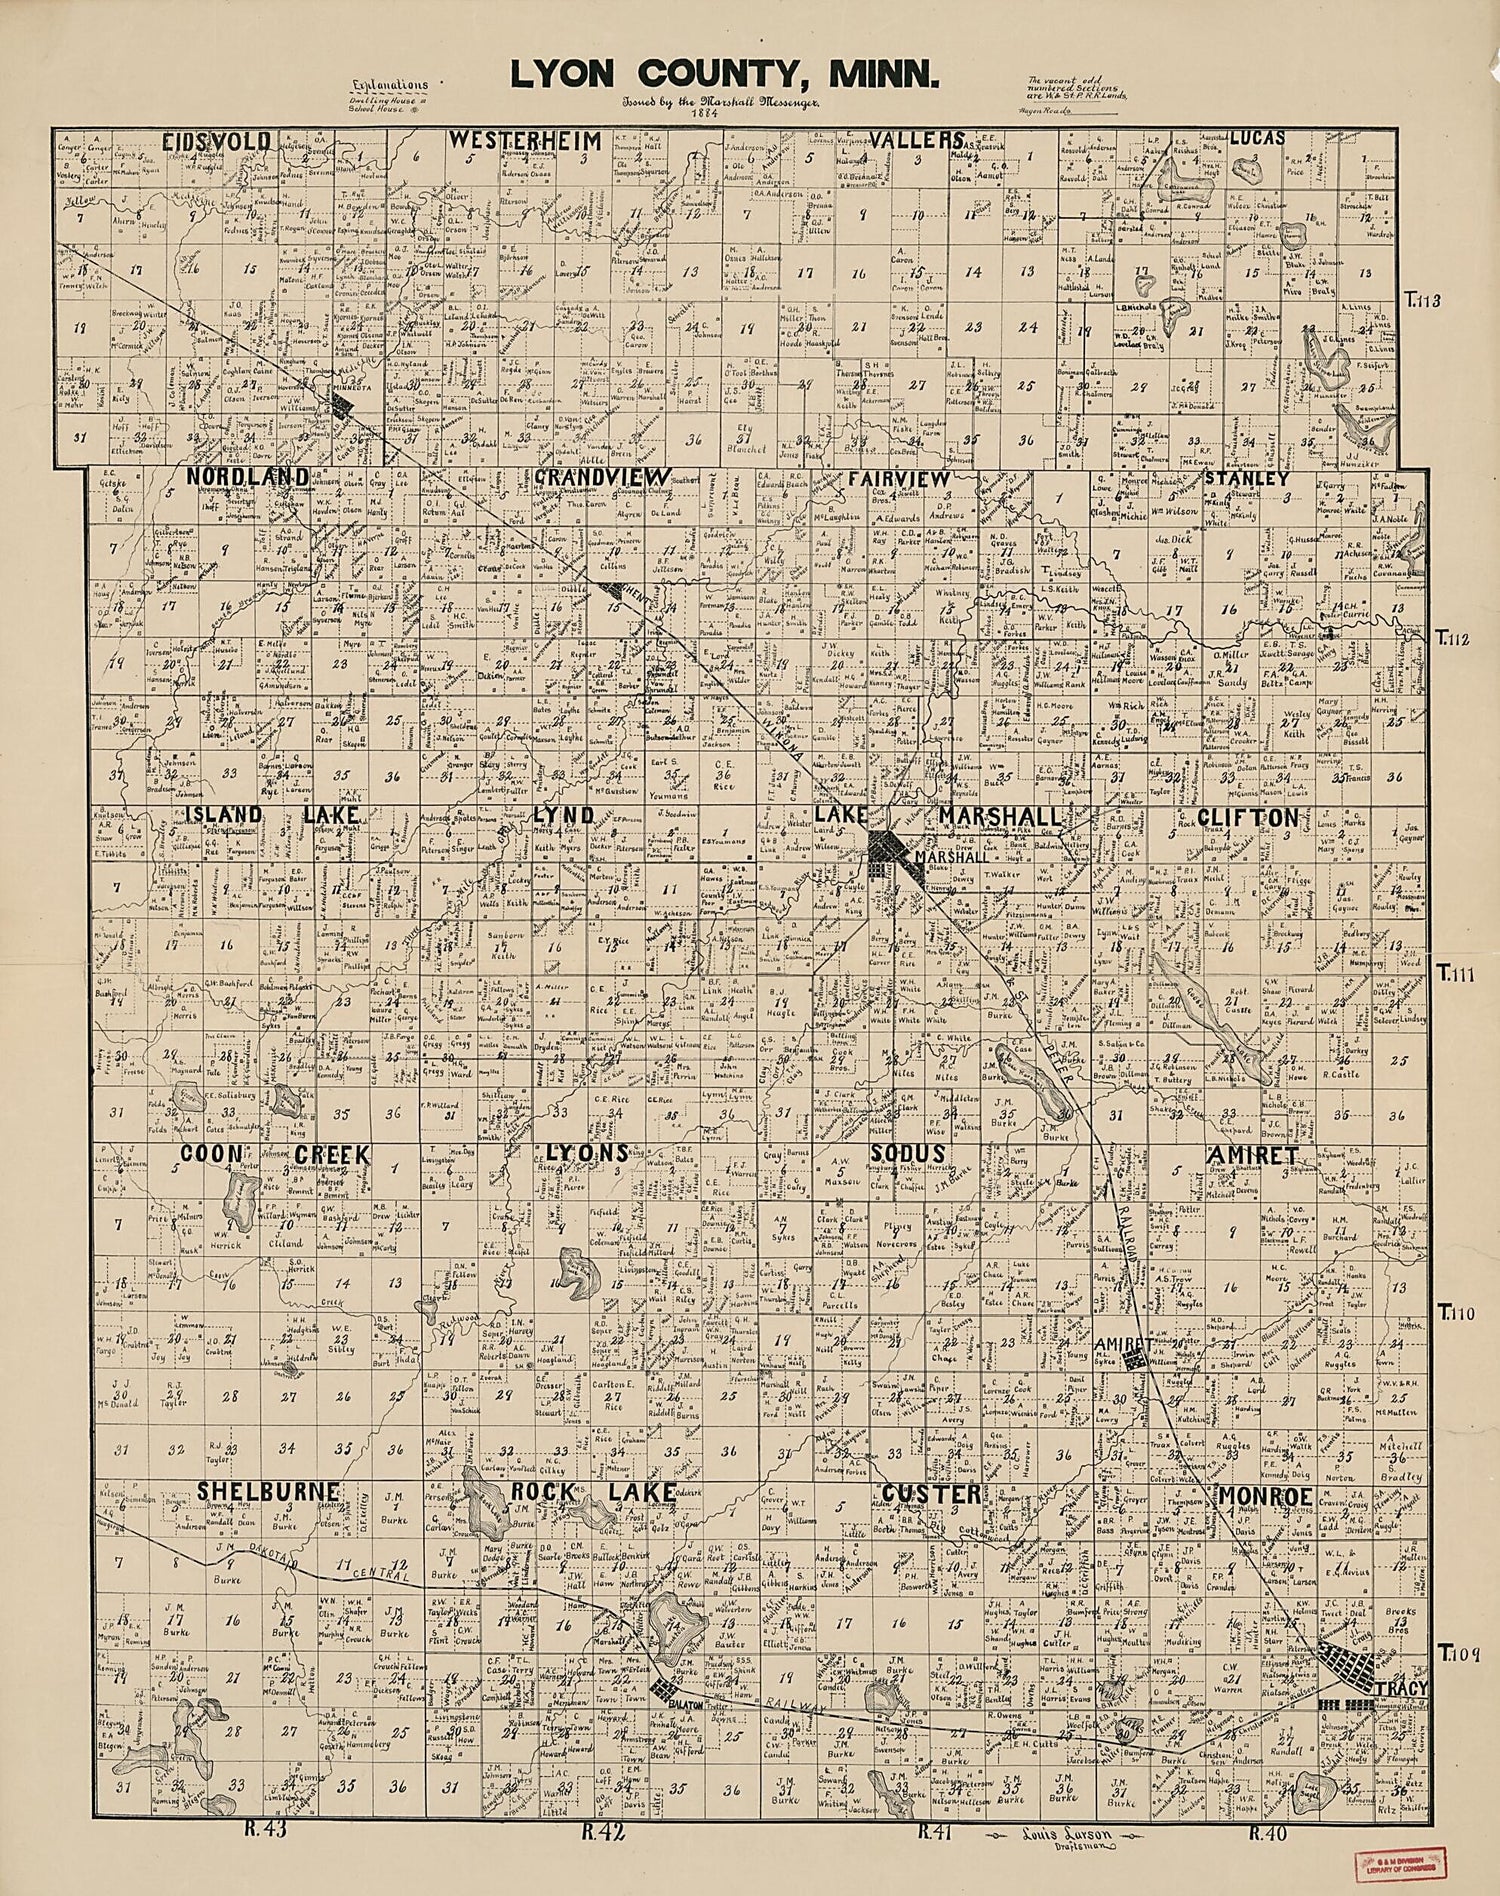 This old map of Lyon County, Minnesota from 1884 was created by Louis Larson in 1884